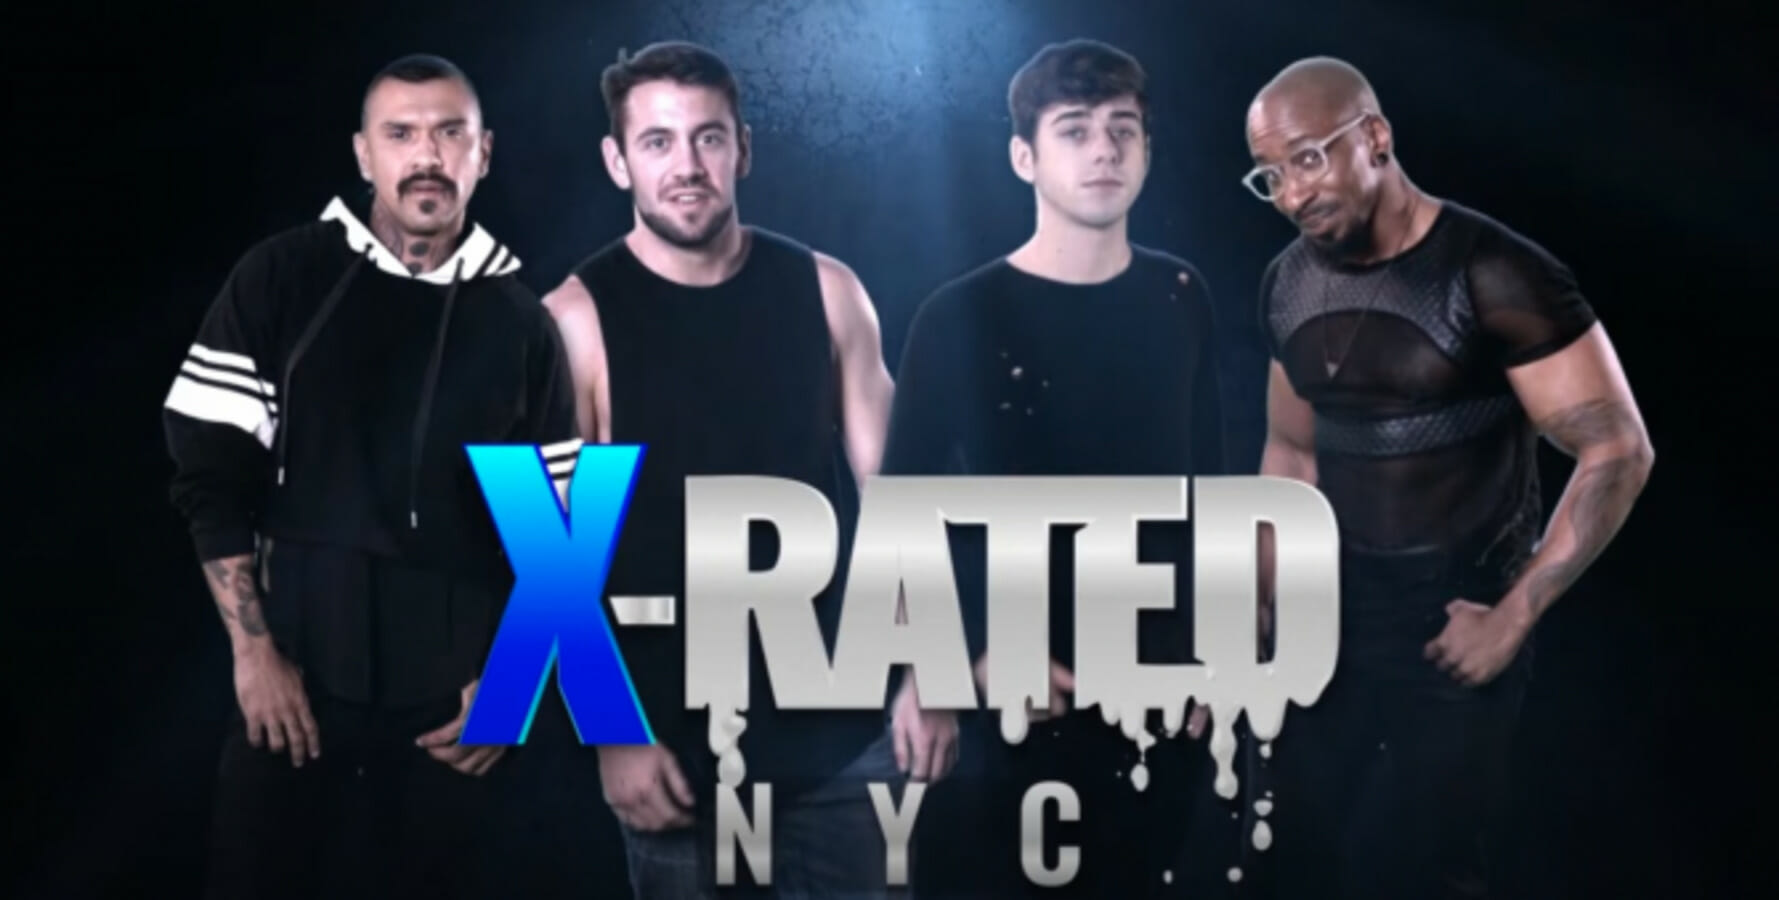 X-Rated NYC